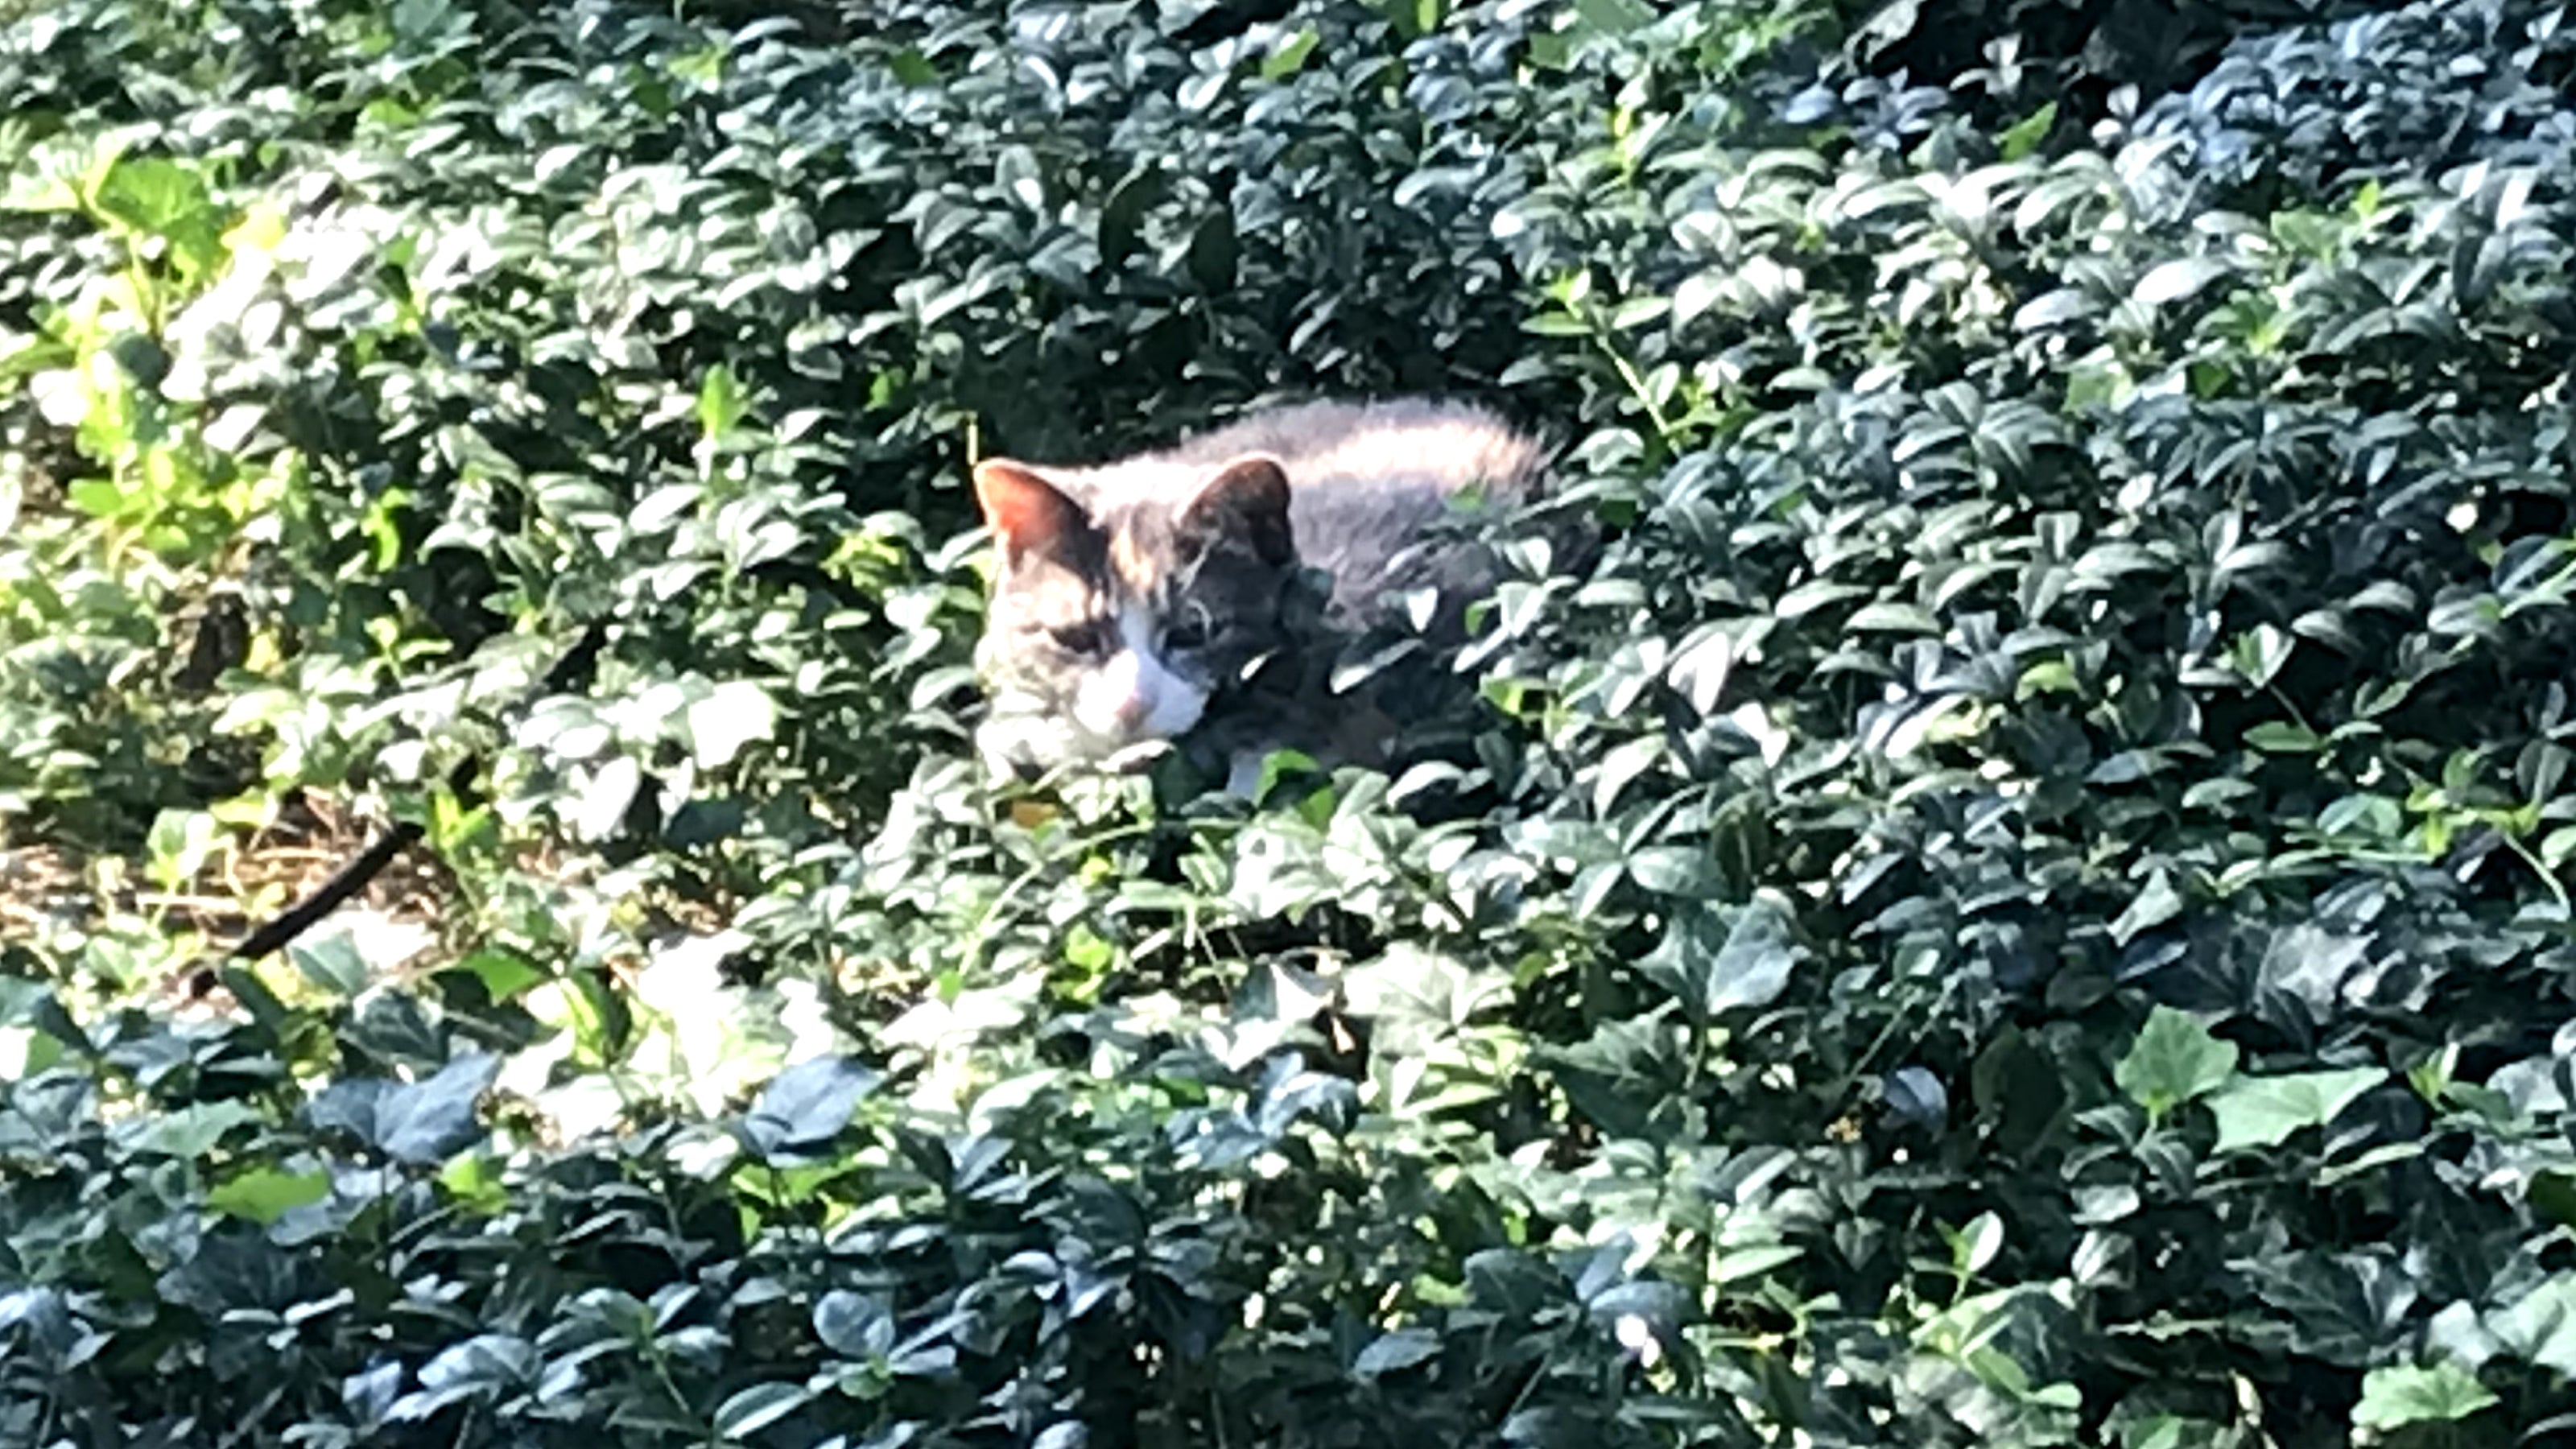 A brown and gray striped cat with a white muzzle peeks out from greenery ground cover